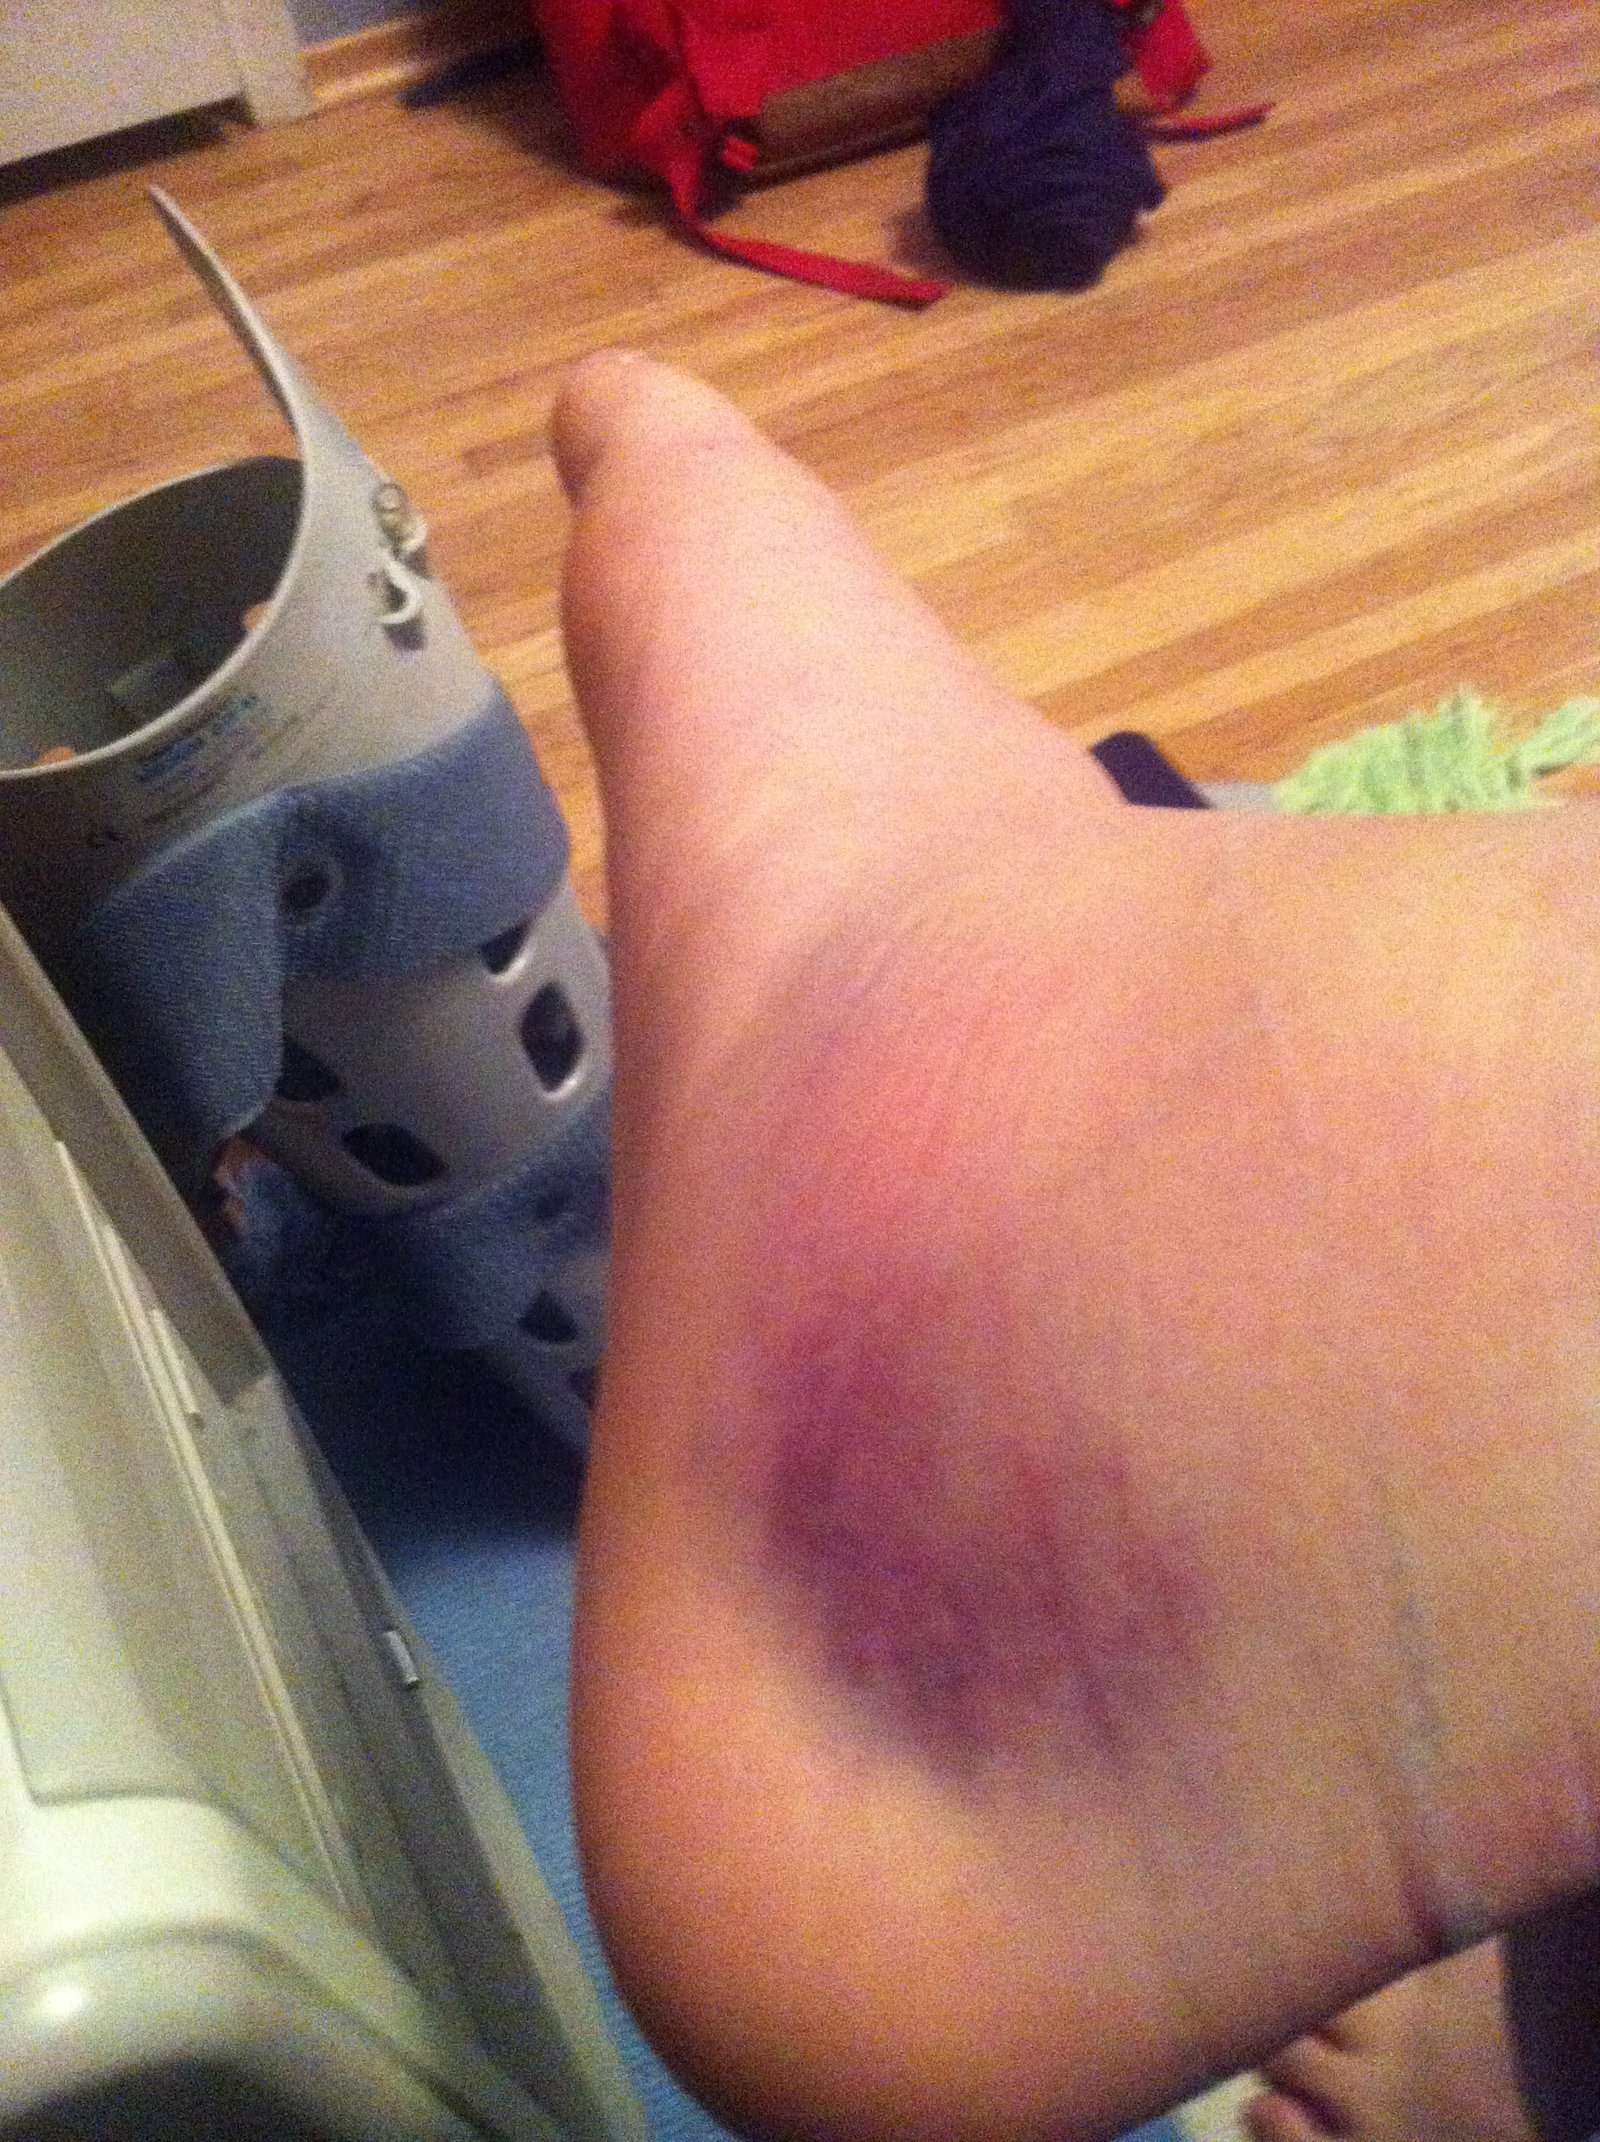 My swollen and bruised foot plus my air cast 